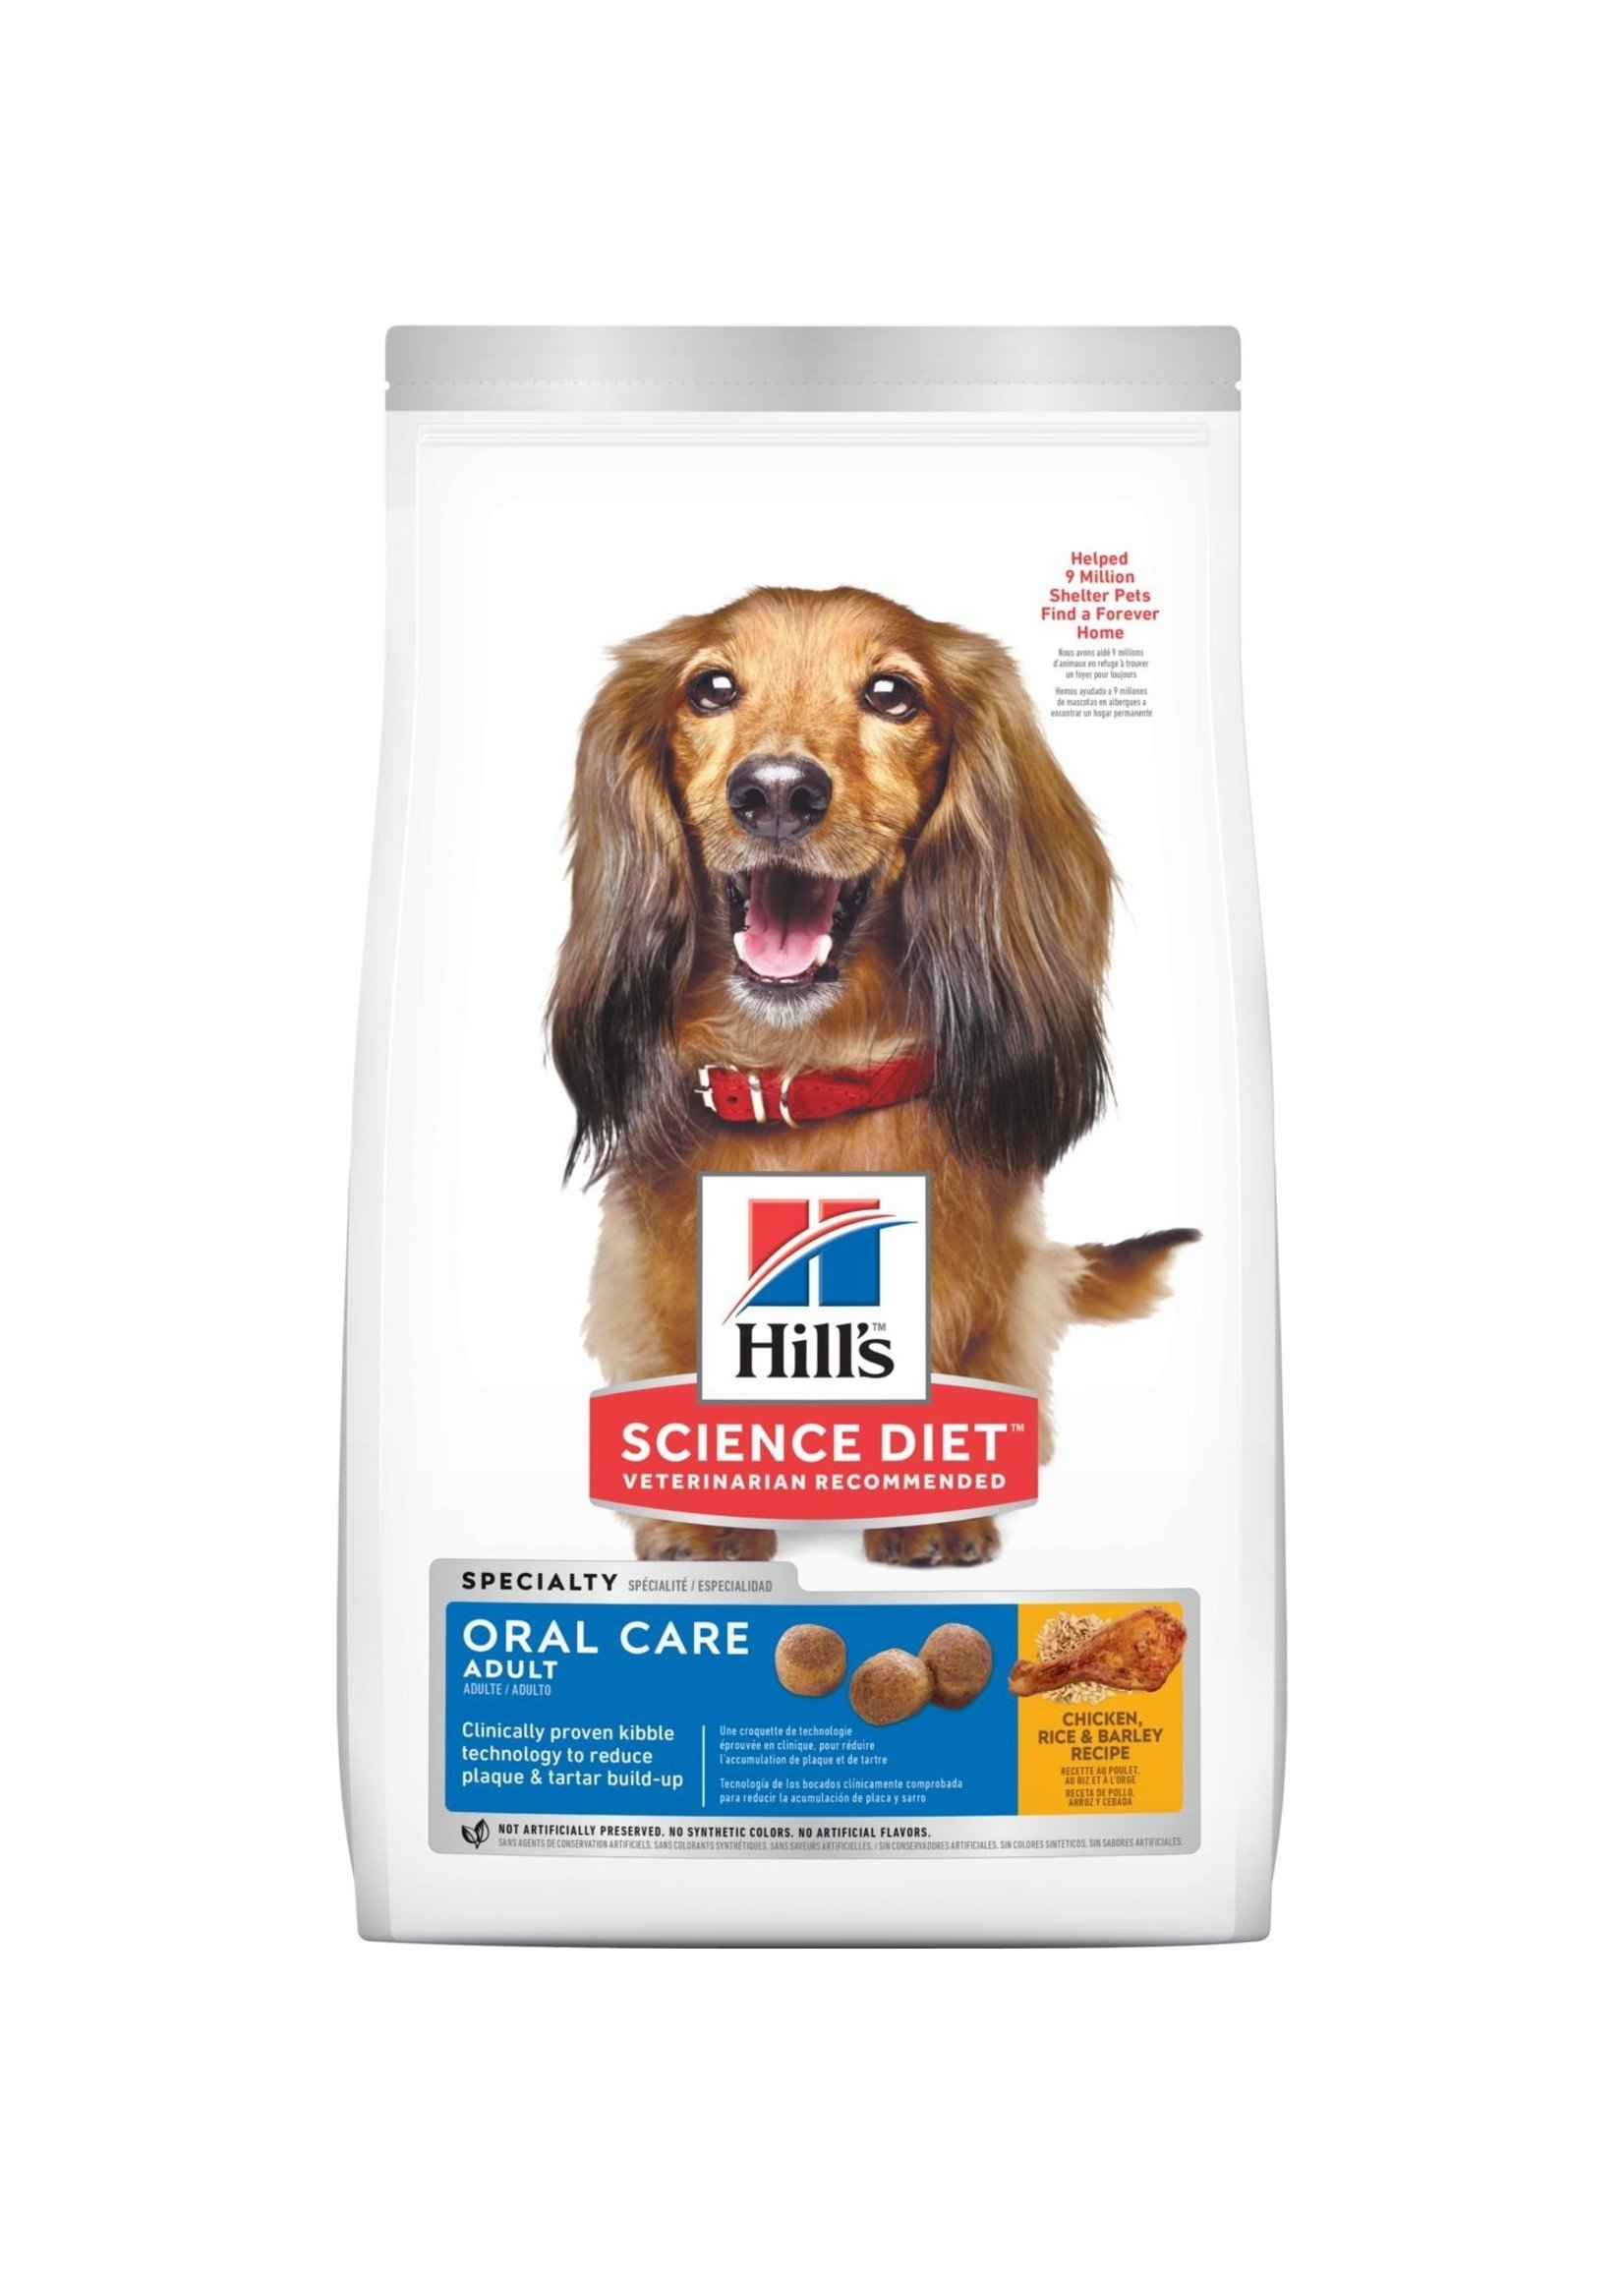 Hill's Science Diet Hill's Science Diet Adult Oral Care Dry Dog Food, Chicken, Rice & Barley Recipe